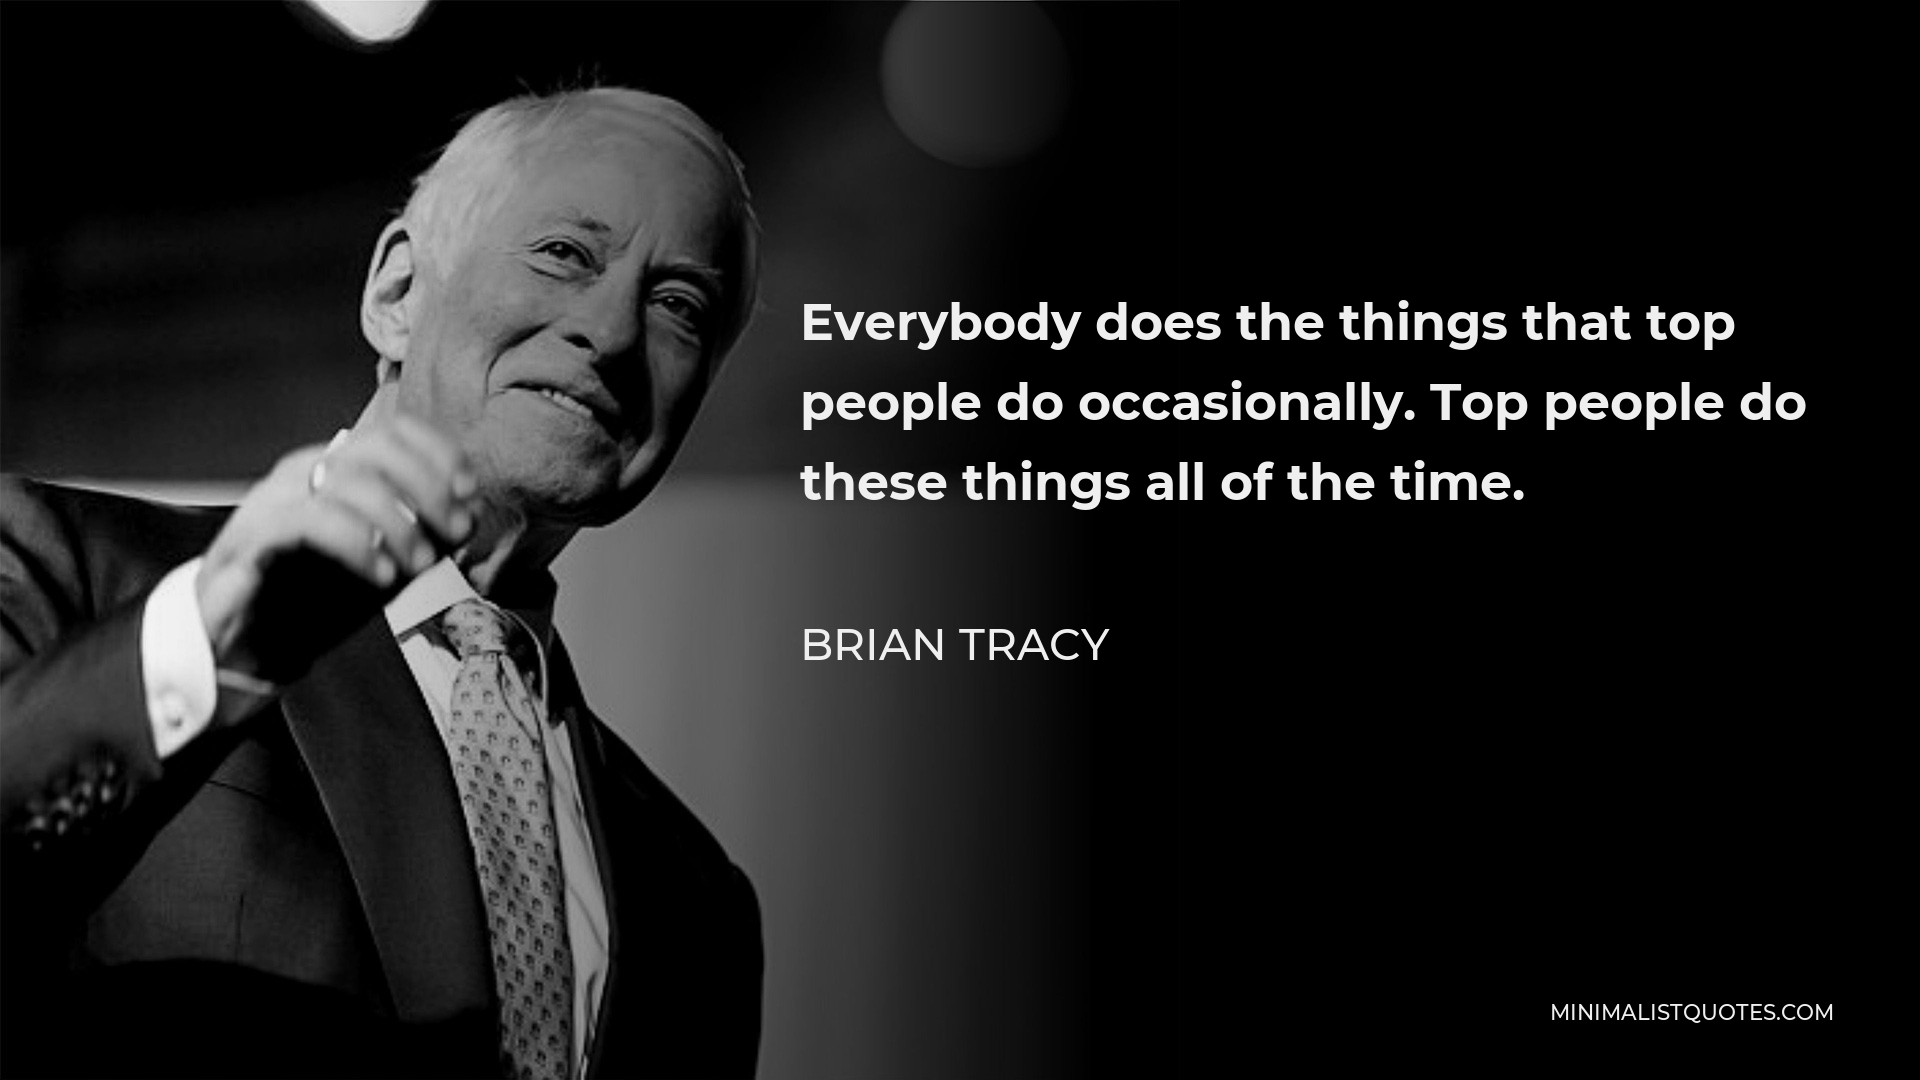 Brian Tracy Quote - Everybody does the things that top people do occasionally. Top people do these things all of the time.